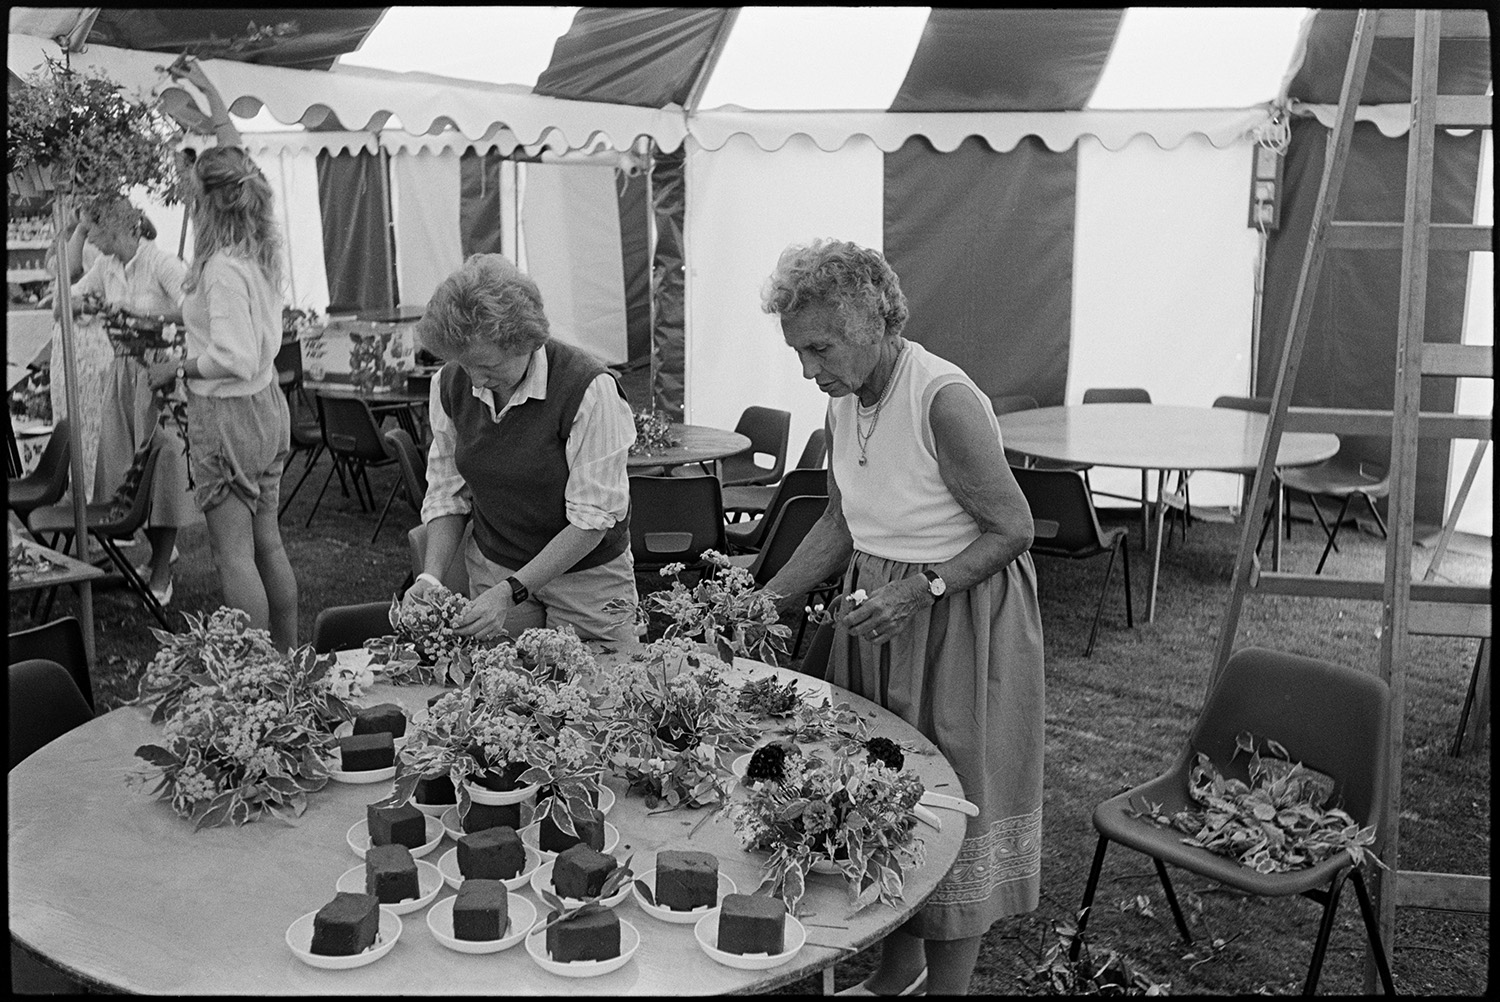 Women decorating marquee tent for hunt ball, flowers, laying tables, tombola, clipping lawn.
[Women decorating the inside of a marquee with flowers for the Eggesford Hunt Ball at Colleton Manor, Chulmleigh. Two women are making table top flower decorations at a table.]